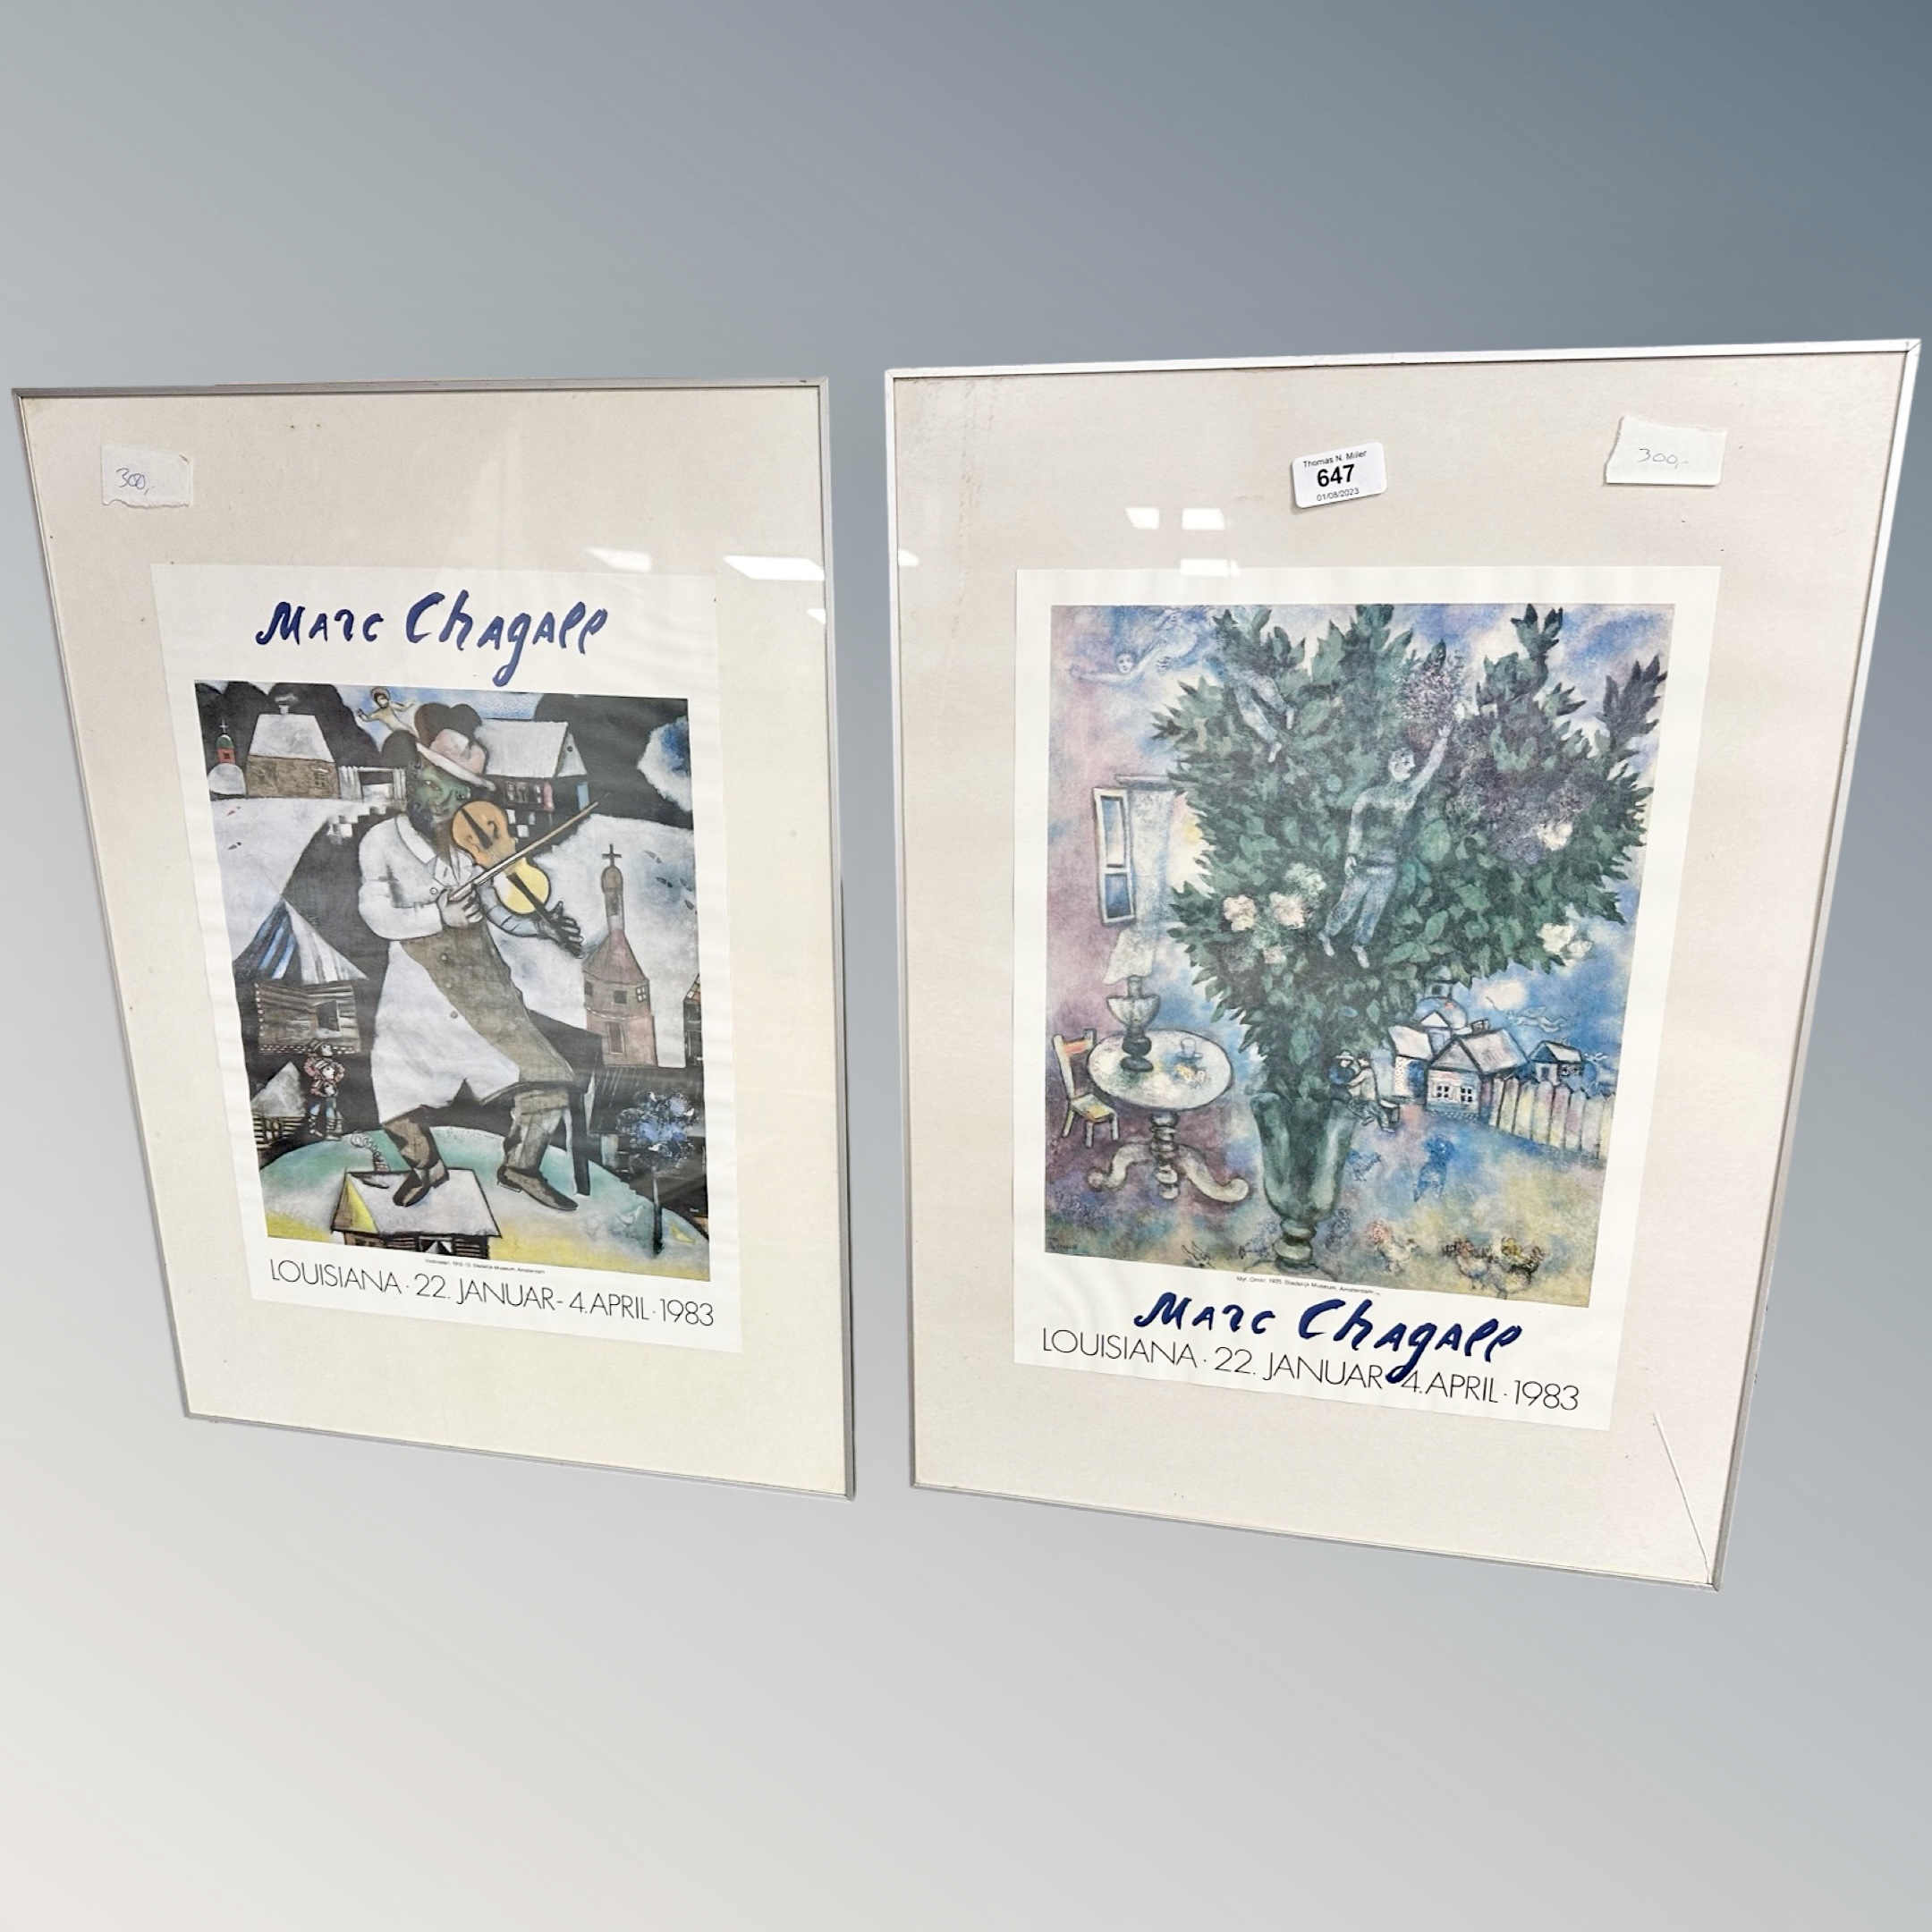 Three continental posters - Marc Chagall, together with one other.